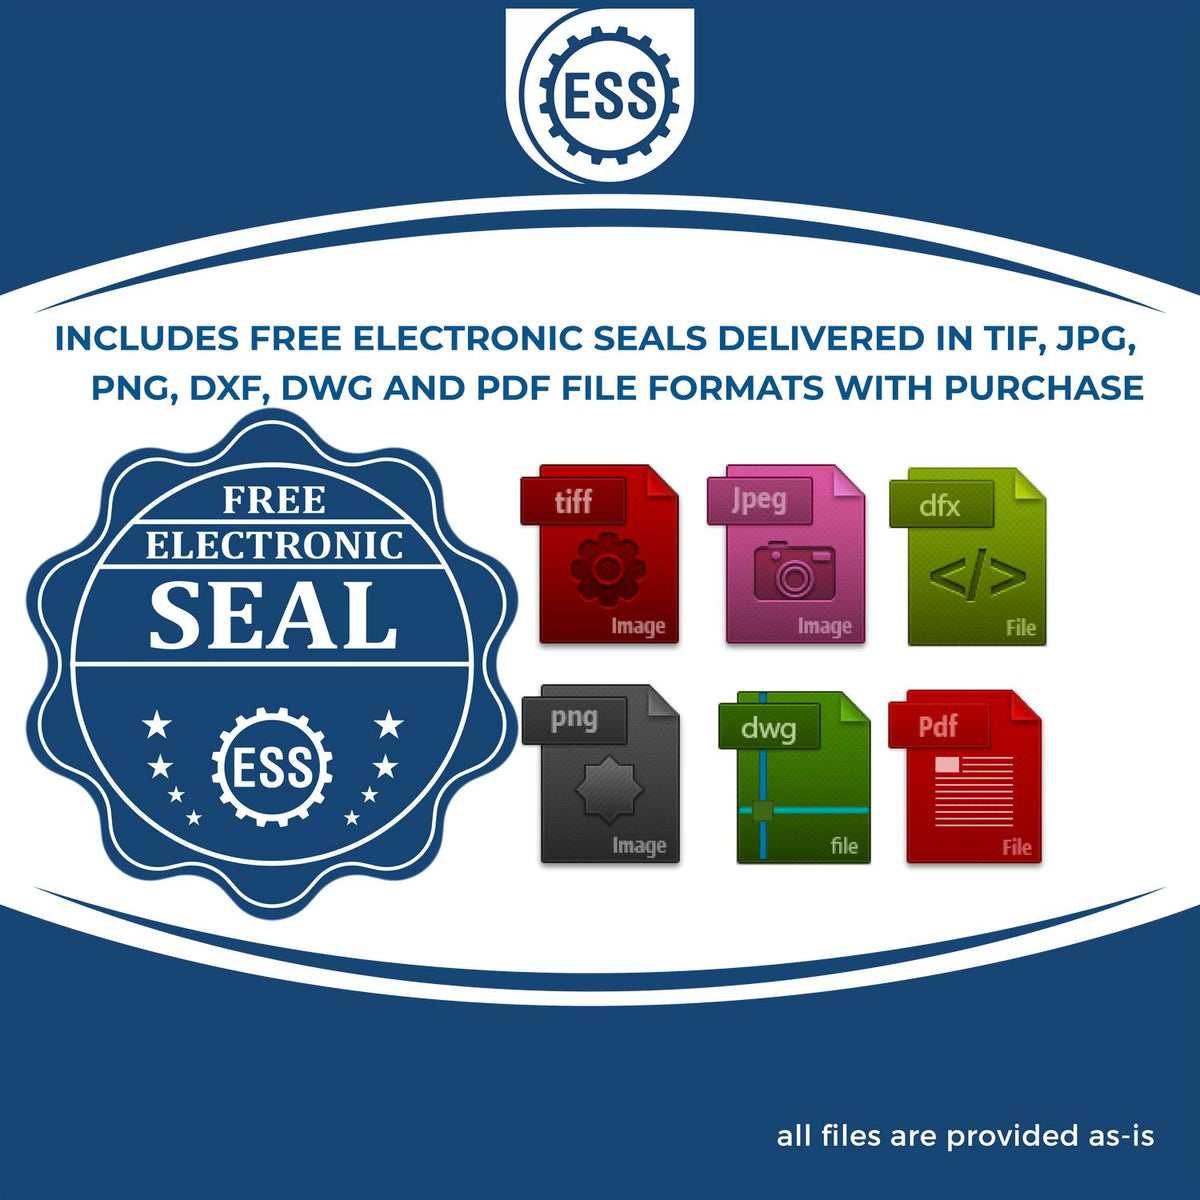 An infographic for the free electronic seal for the Long Reach Wisconsin Geology Seal illustrating the different file type icons such as DXF, DWG, TIF, JPG and PNG.